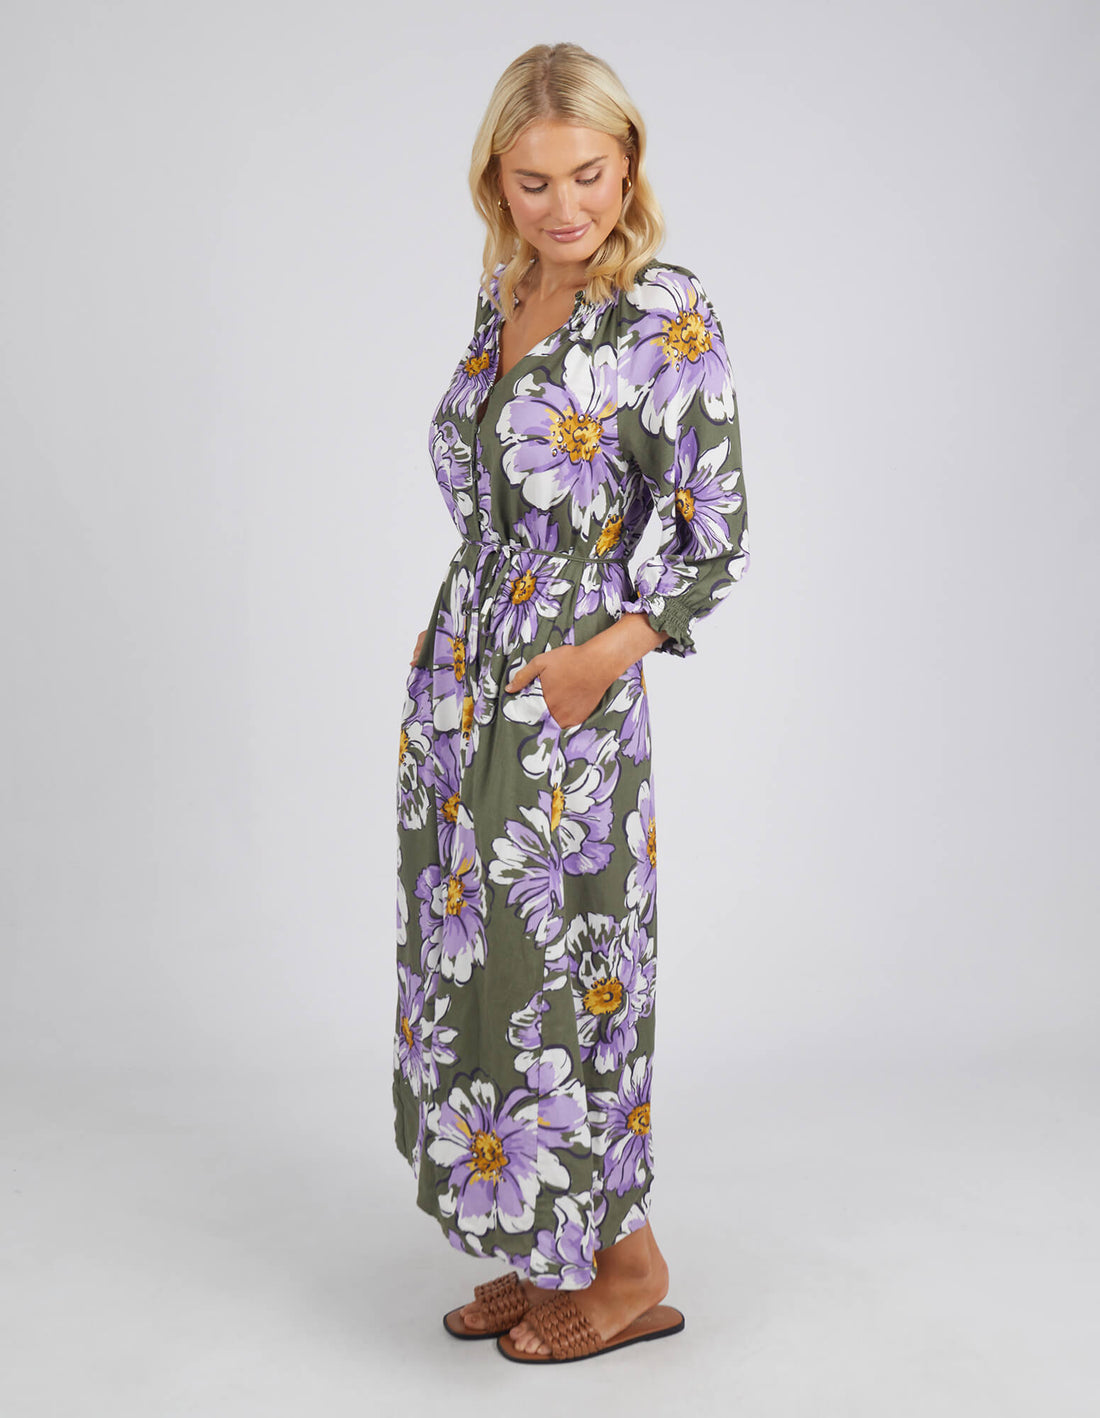 Antheia Floral Gathered Dress